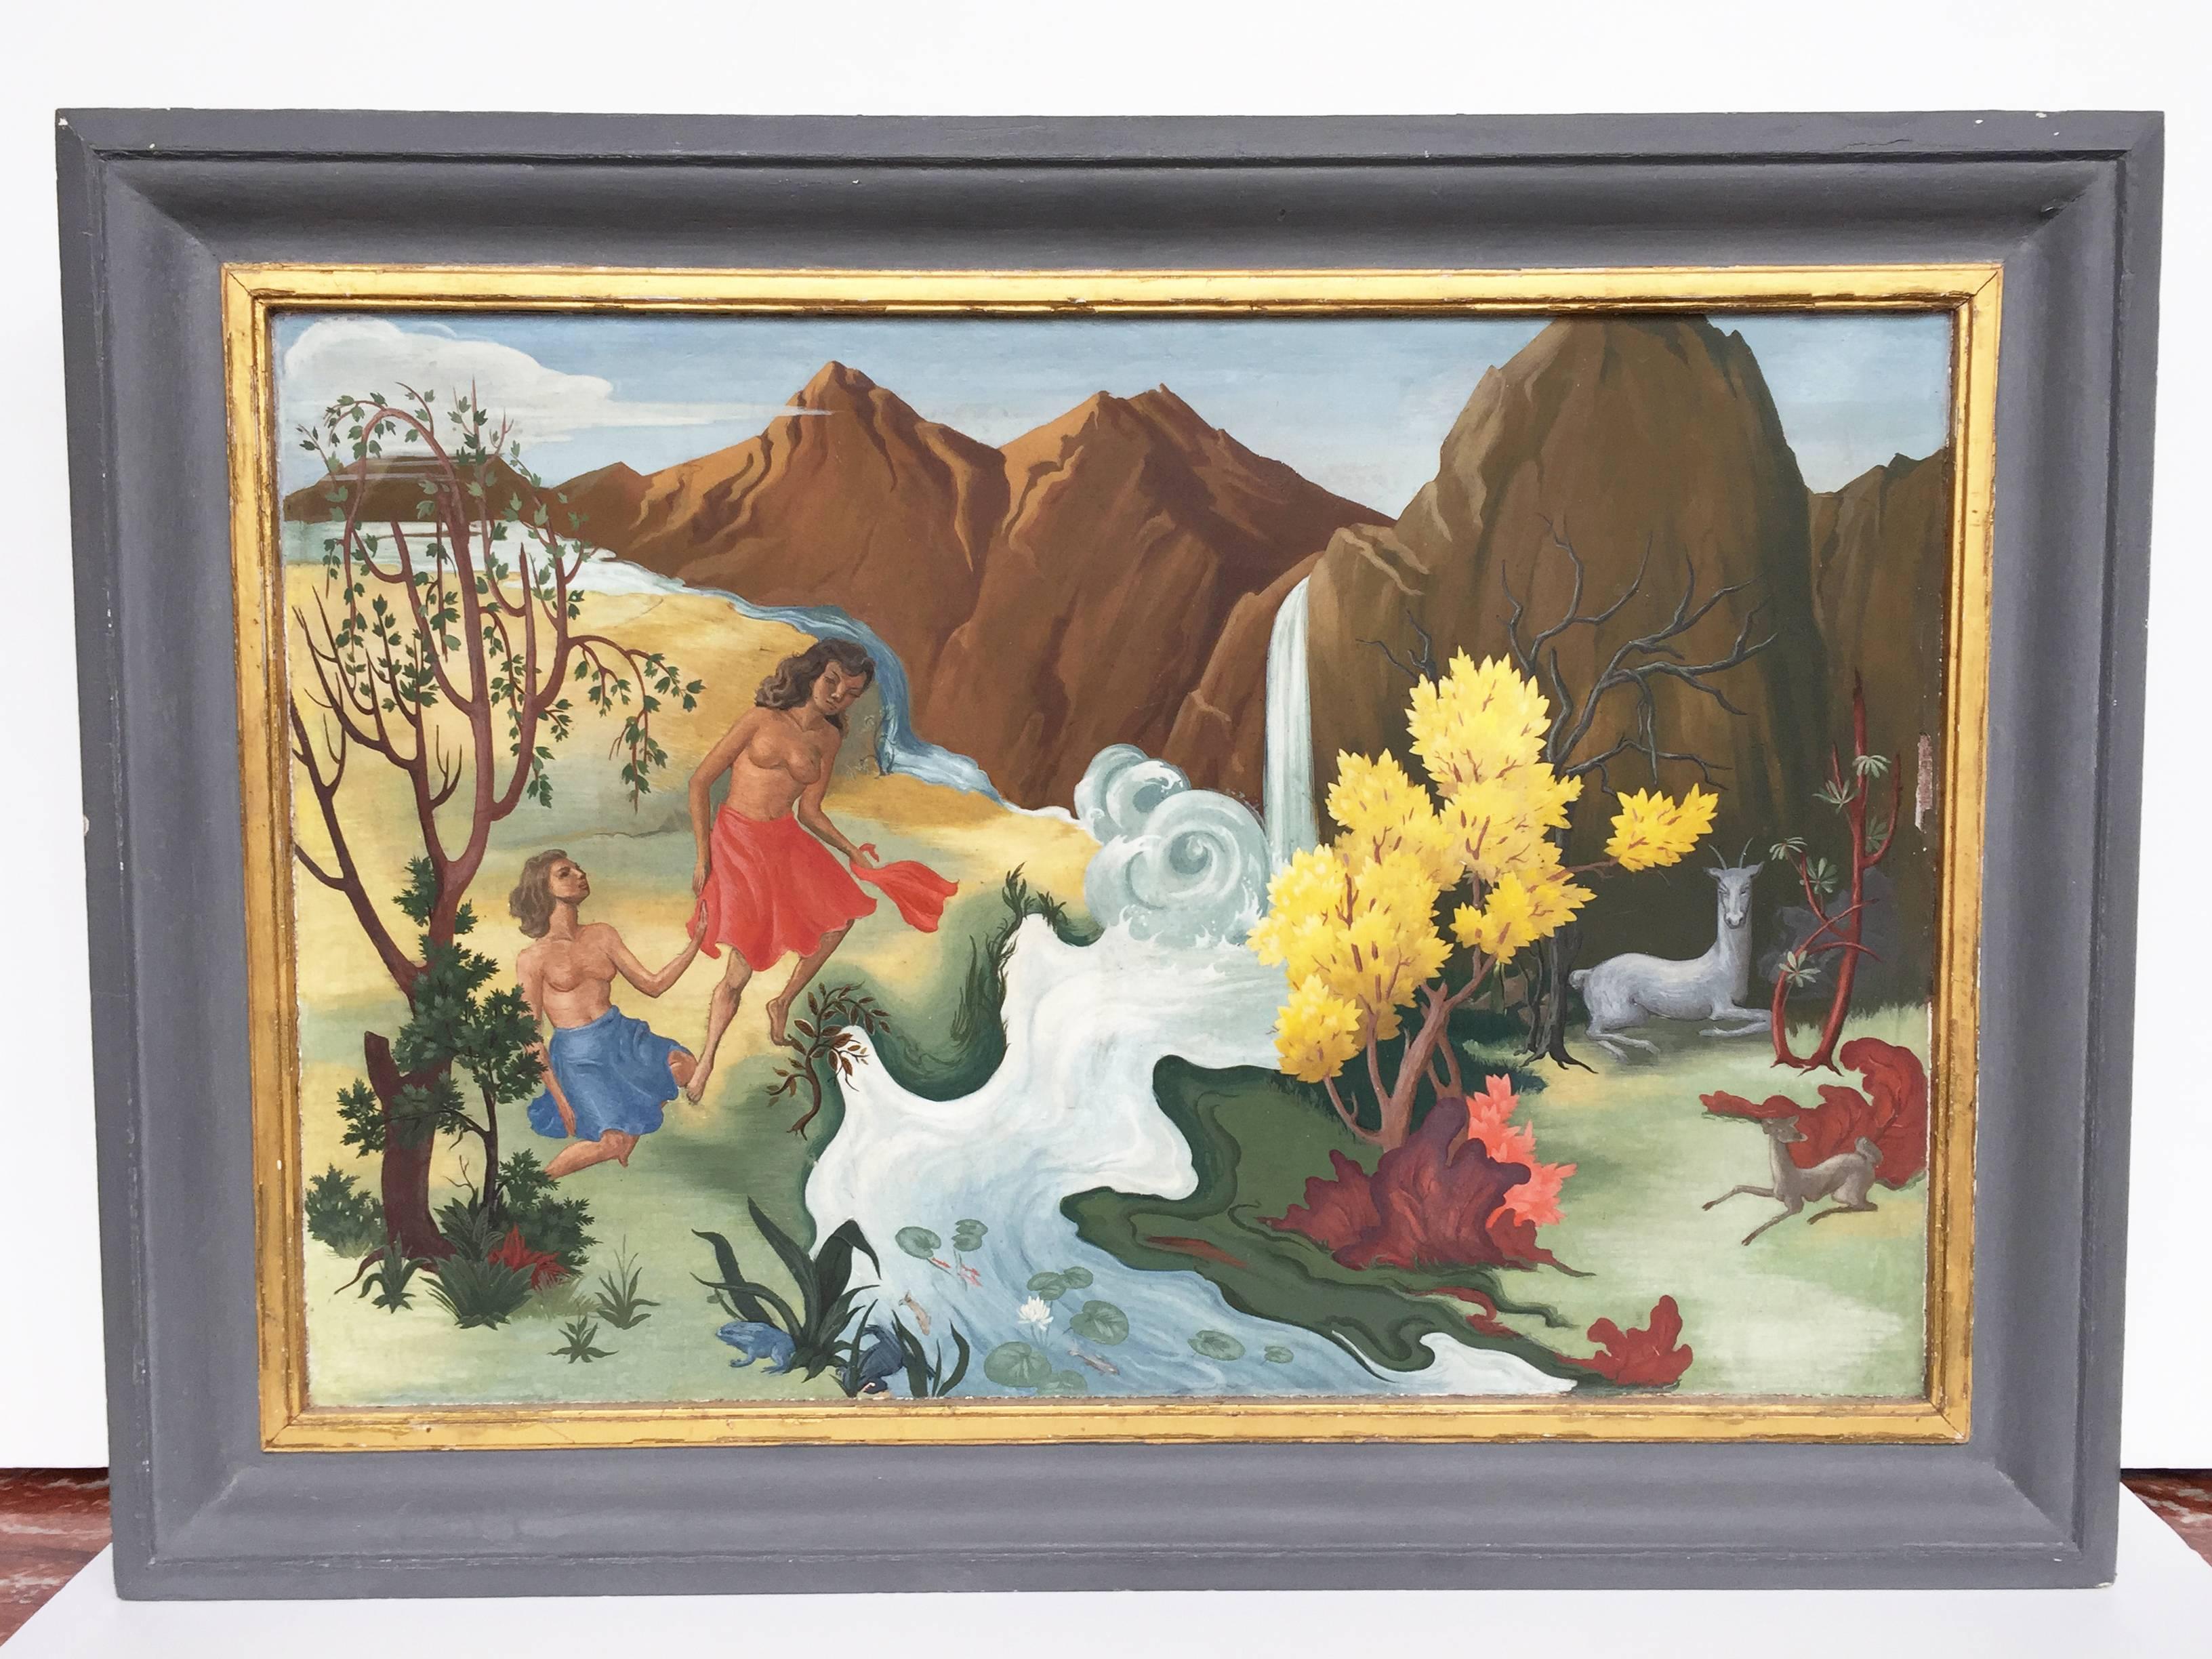 This Surrealist landscape painting was painted, circa mid-20th century, though it could have been created earlier. The materials are gouache on masonite board with a custom, painted hardwood frame. The artist is unknown, although hand-written on the